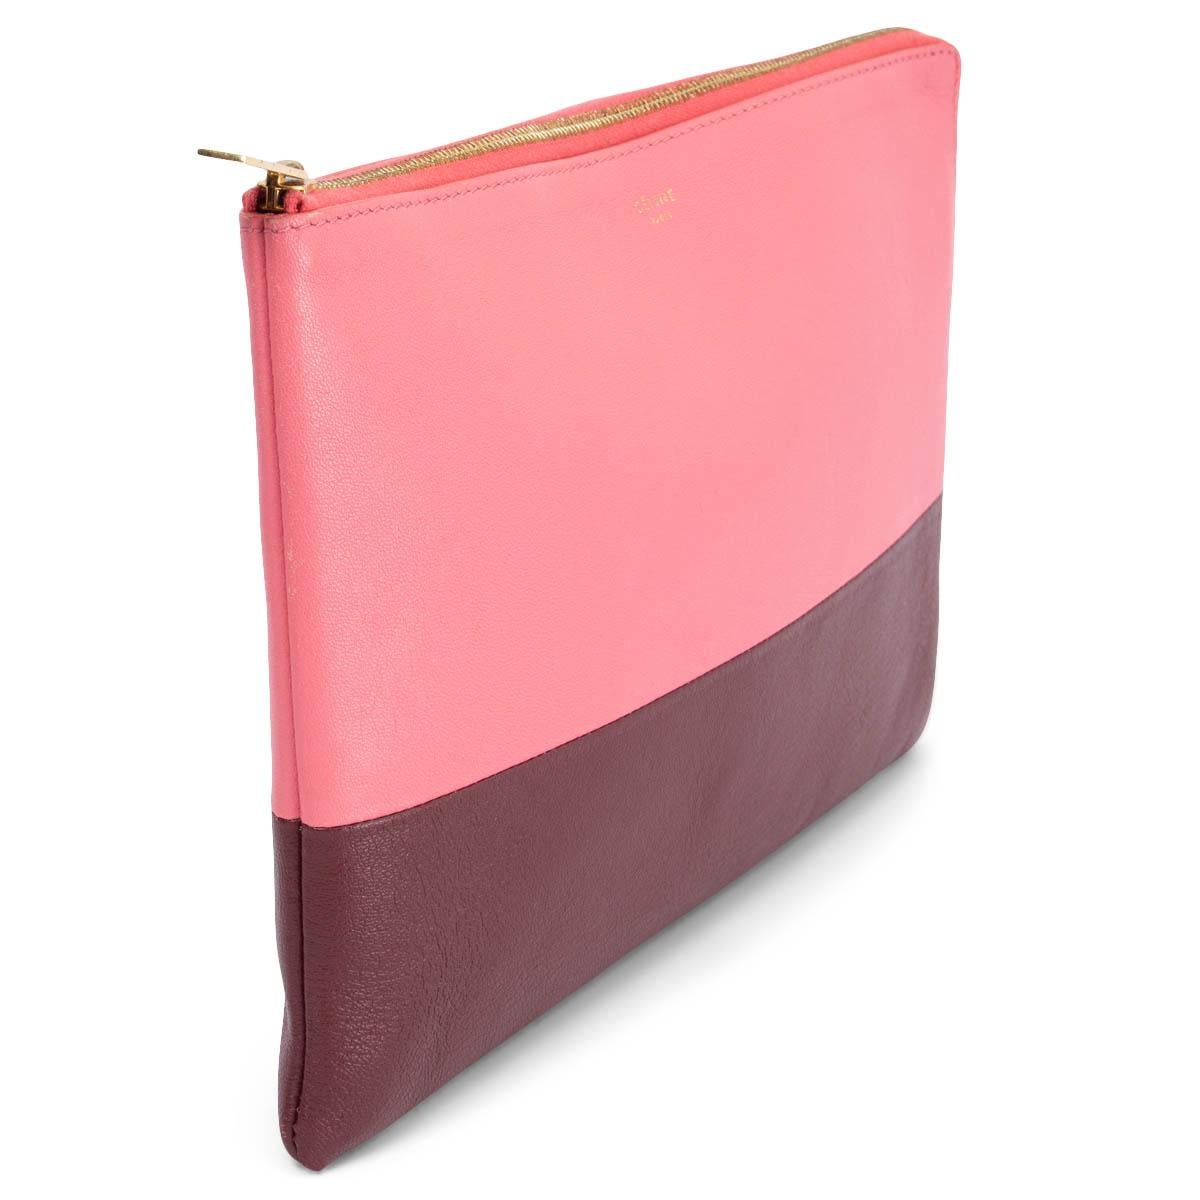 100% authentic Céline Solo pouch in pink and burgundy calfskin with gold-tone zipper. Lined in pink leather. Has been carried and is in excellent condition. 

Measurements
Height	17.5cm (6.8in)
Width	25cm (9.8in)
Depth	1.5cm